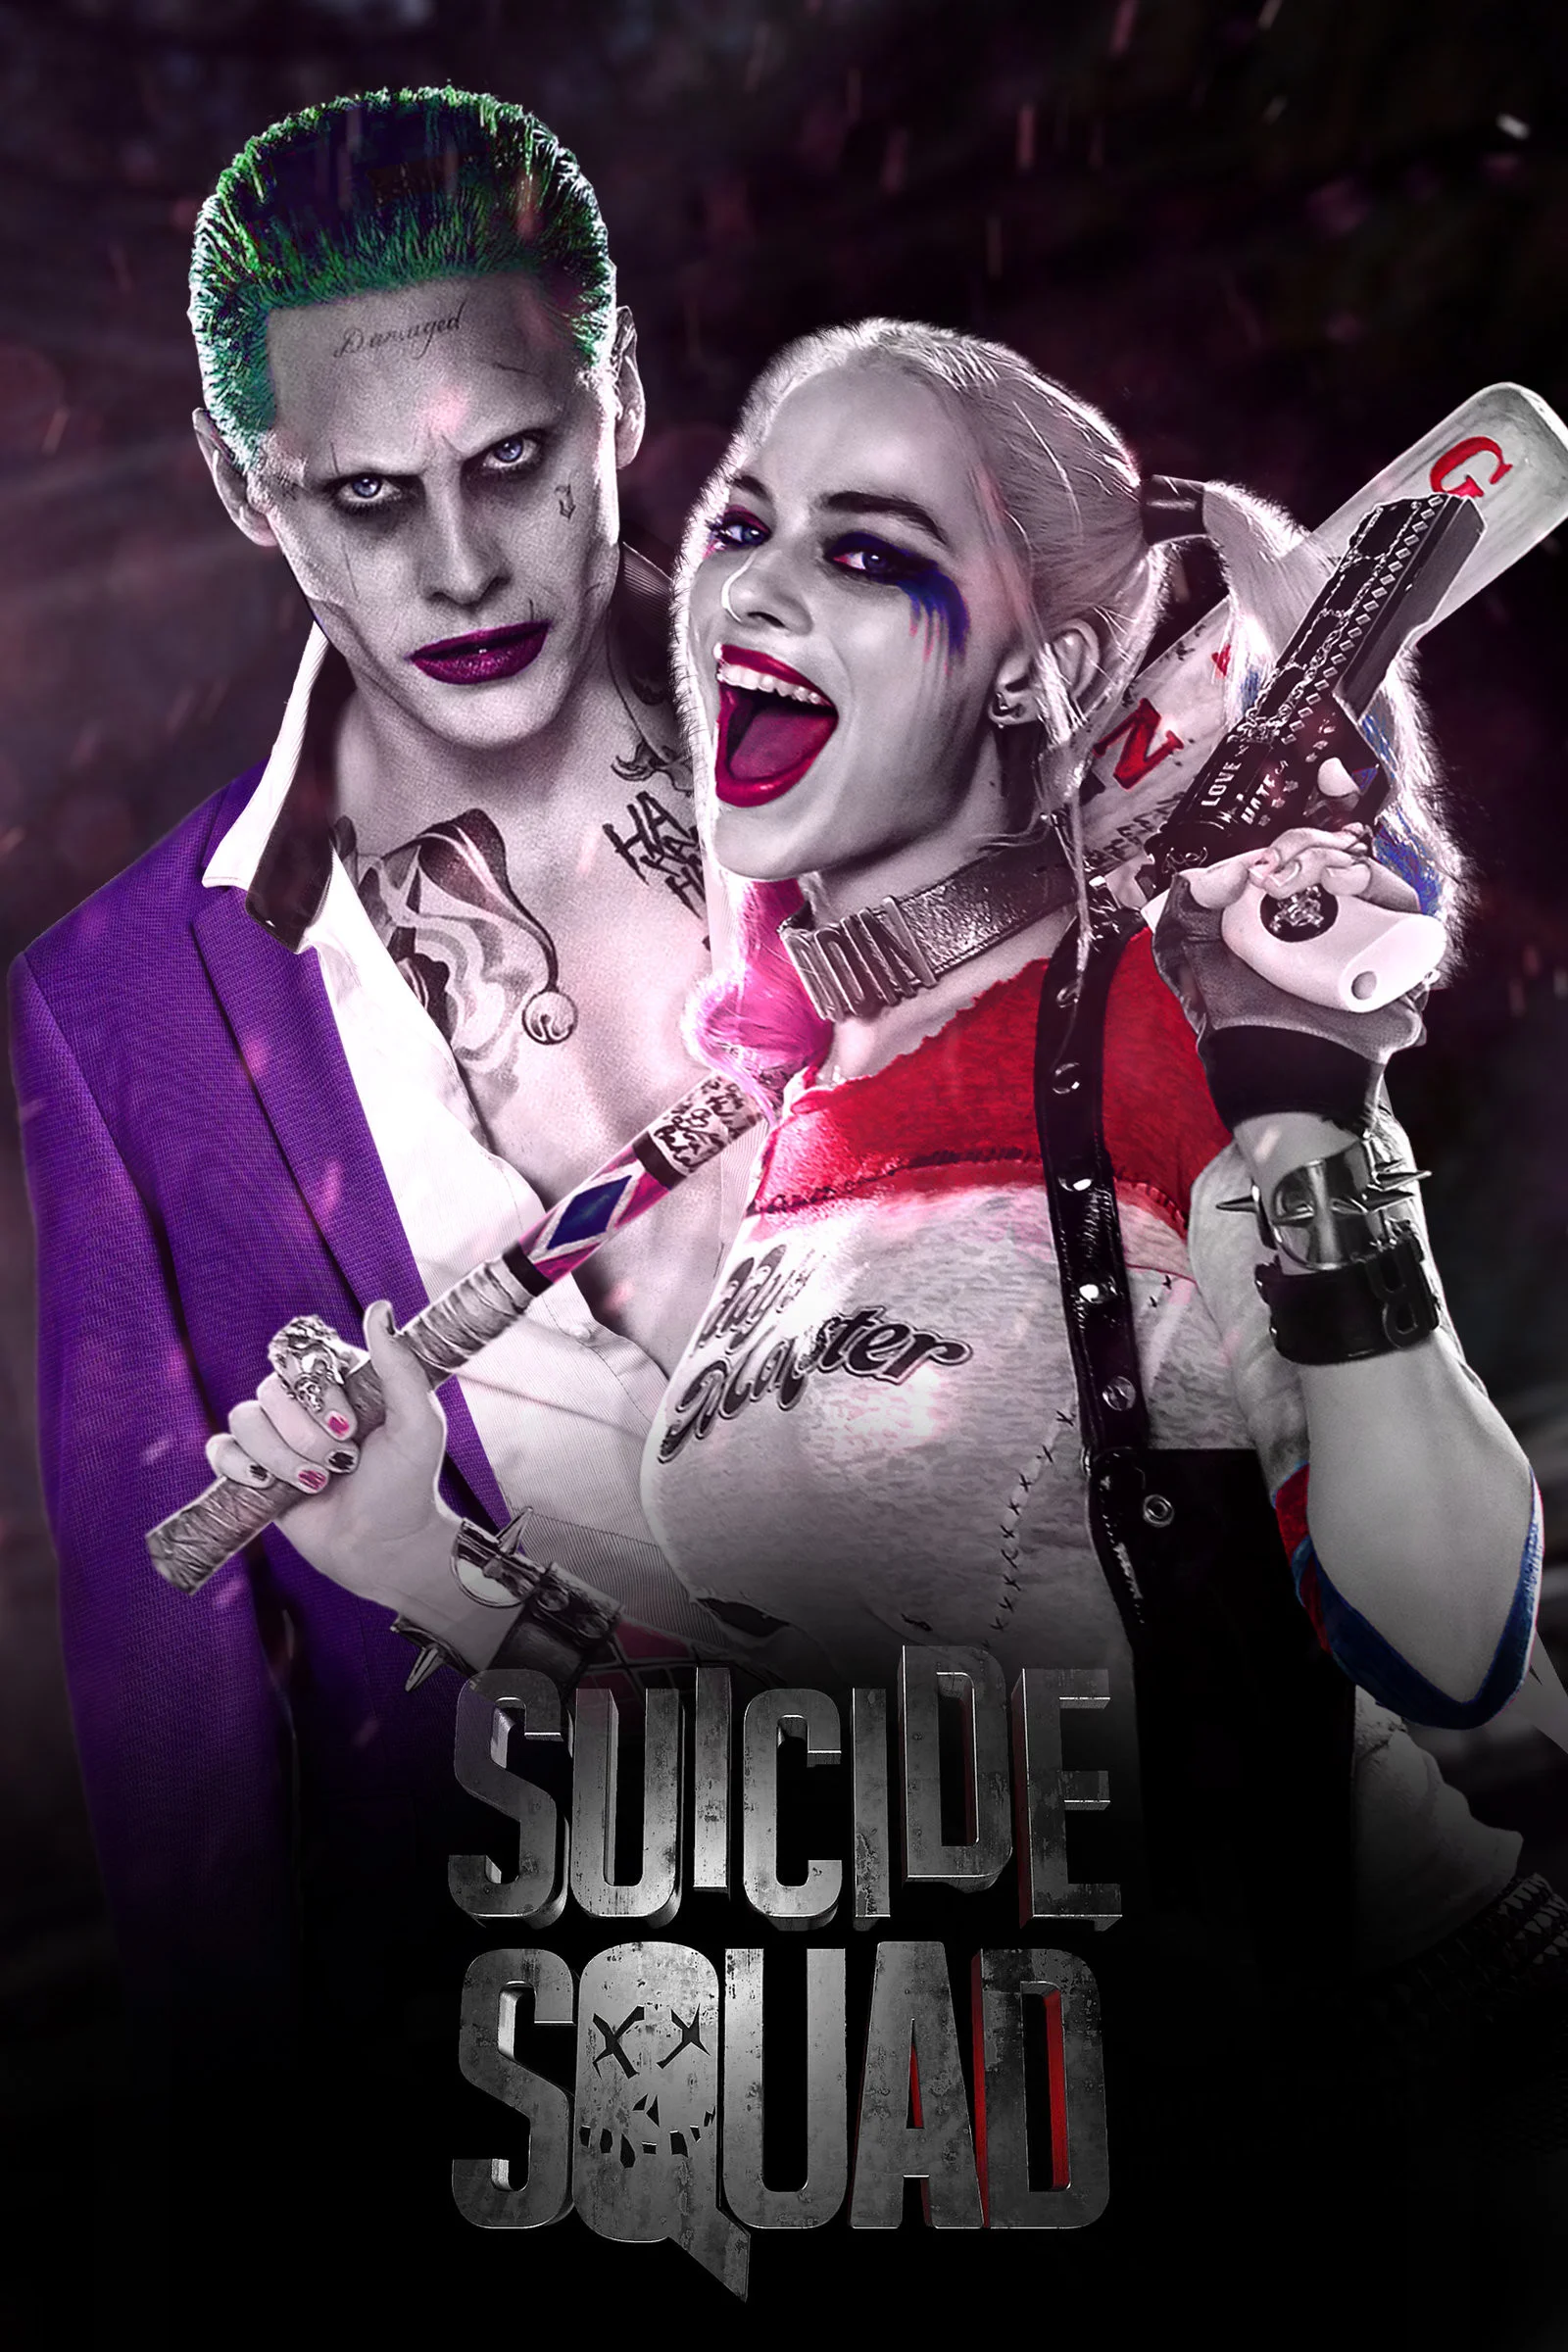 Suicide Squad – Joker and Harley Quinn by jhonaphone on DeviantArt